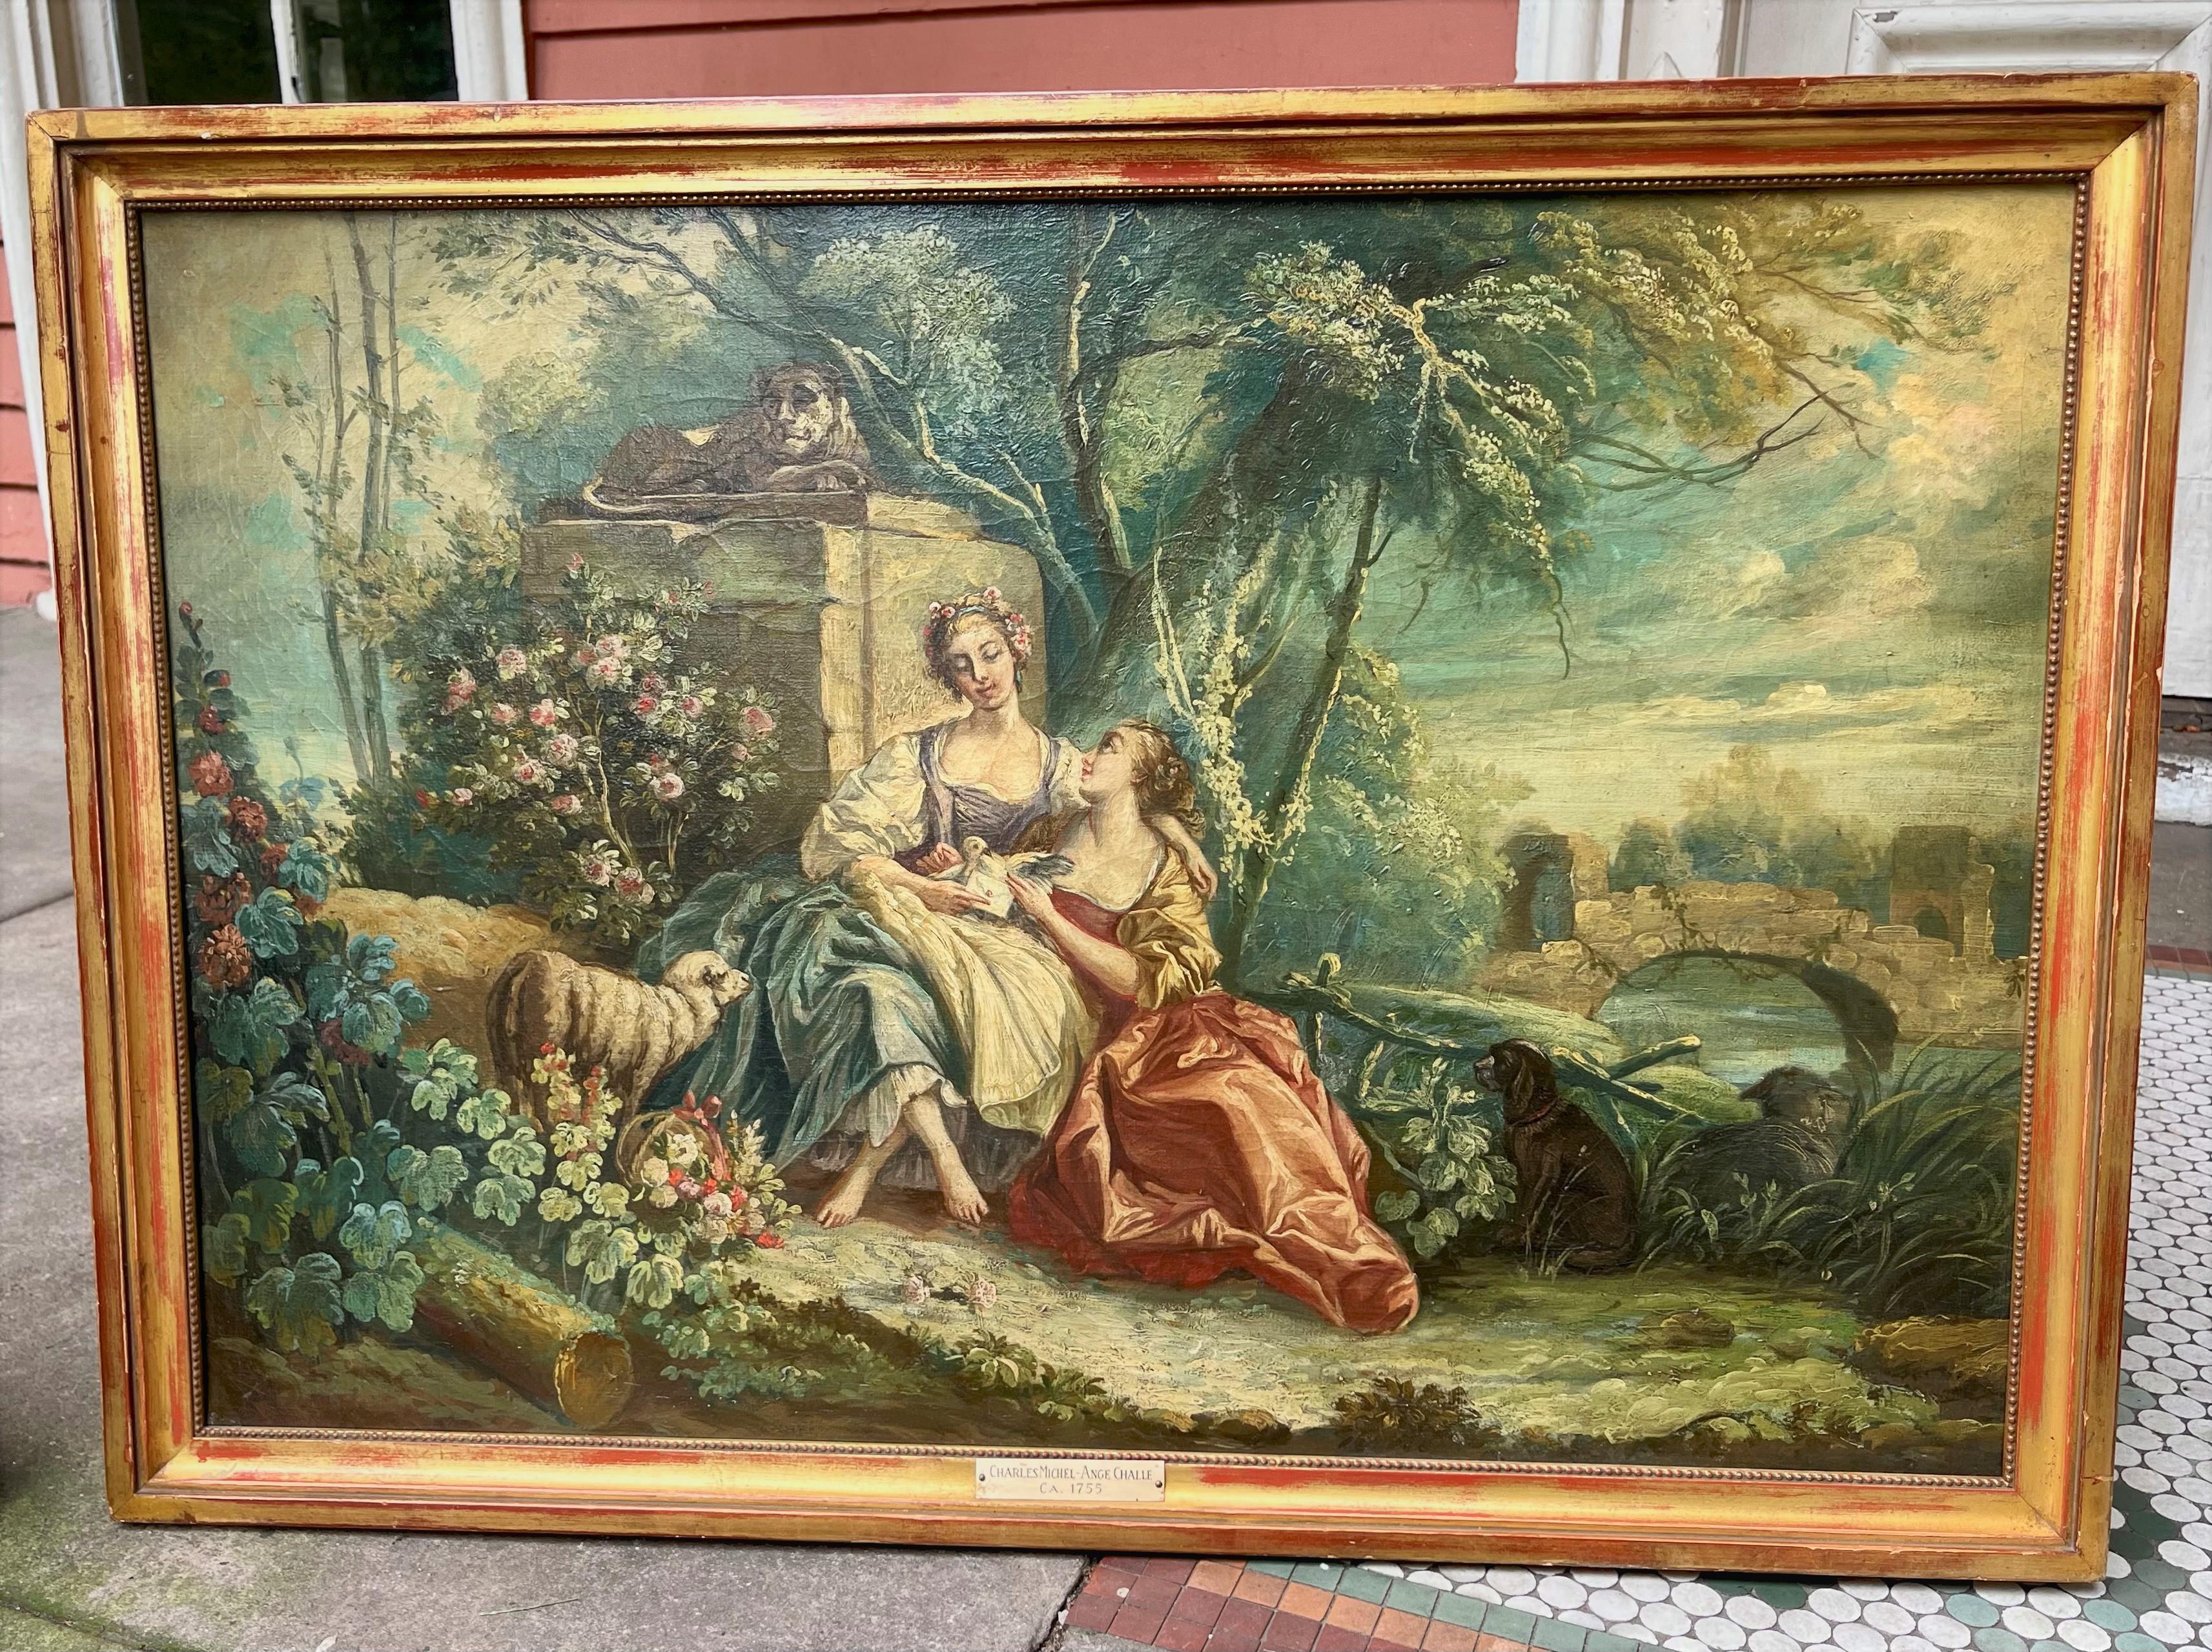 Late 19th or very early 20th century, beautifully worn frame. French School
Old art gallery sticker on back, probably early 20th century sticker,
from J.J. Gillespie, America's oldest fine arts gallery, established in 1832.
Craquelure throughout.